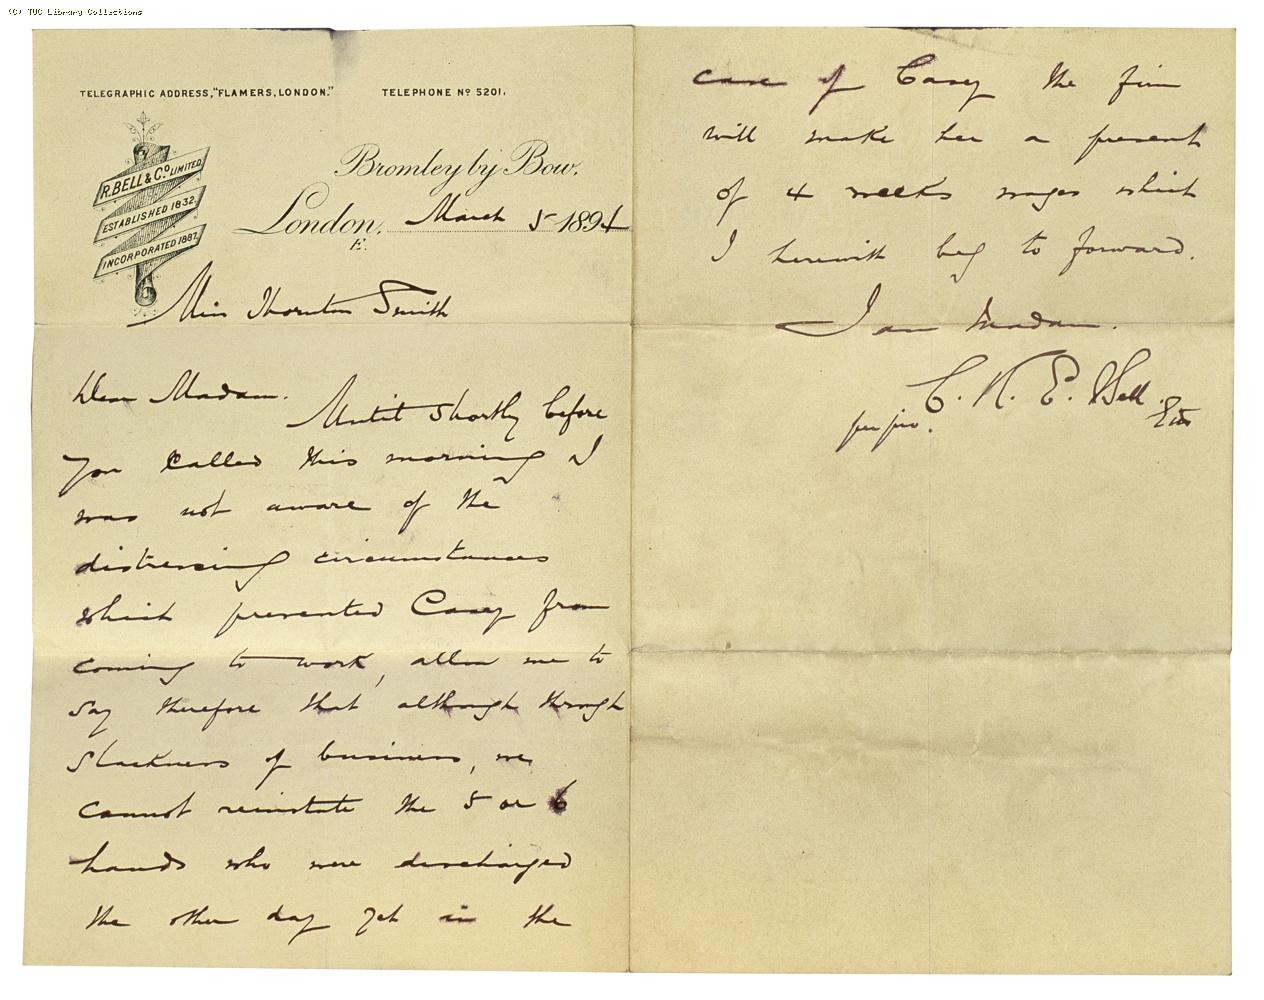 Letter from Charles Bell to Miss Thornton Smith re: dismissal case [Casey] 5 March 1894